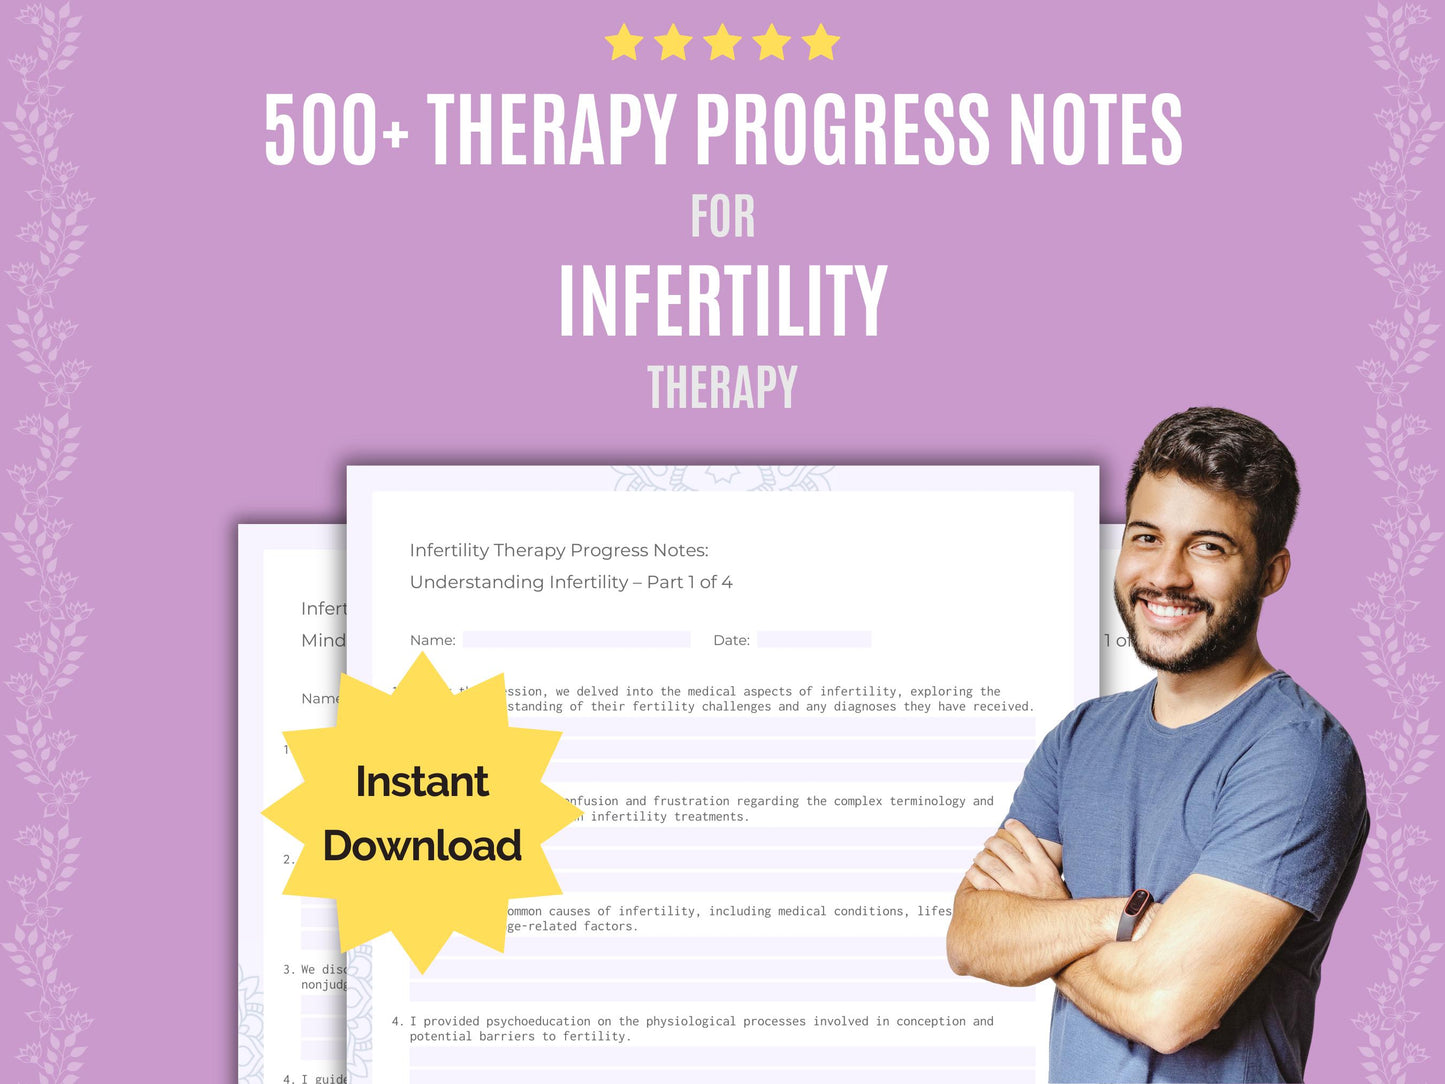 Infertility Therapy Progress Notes Resource